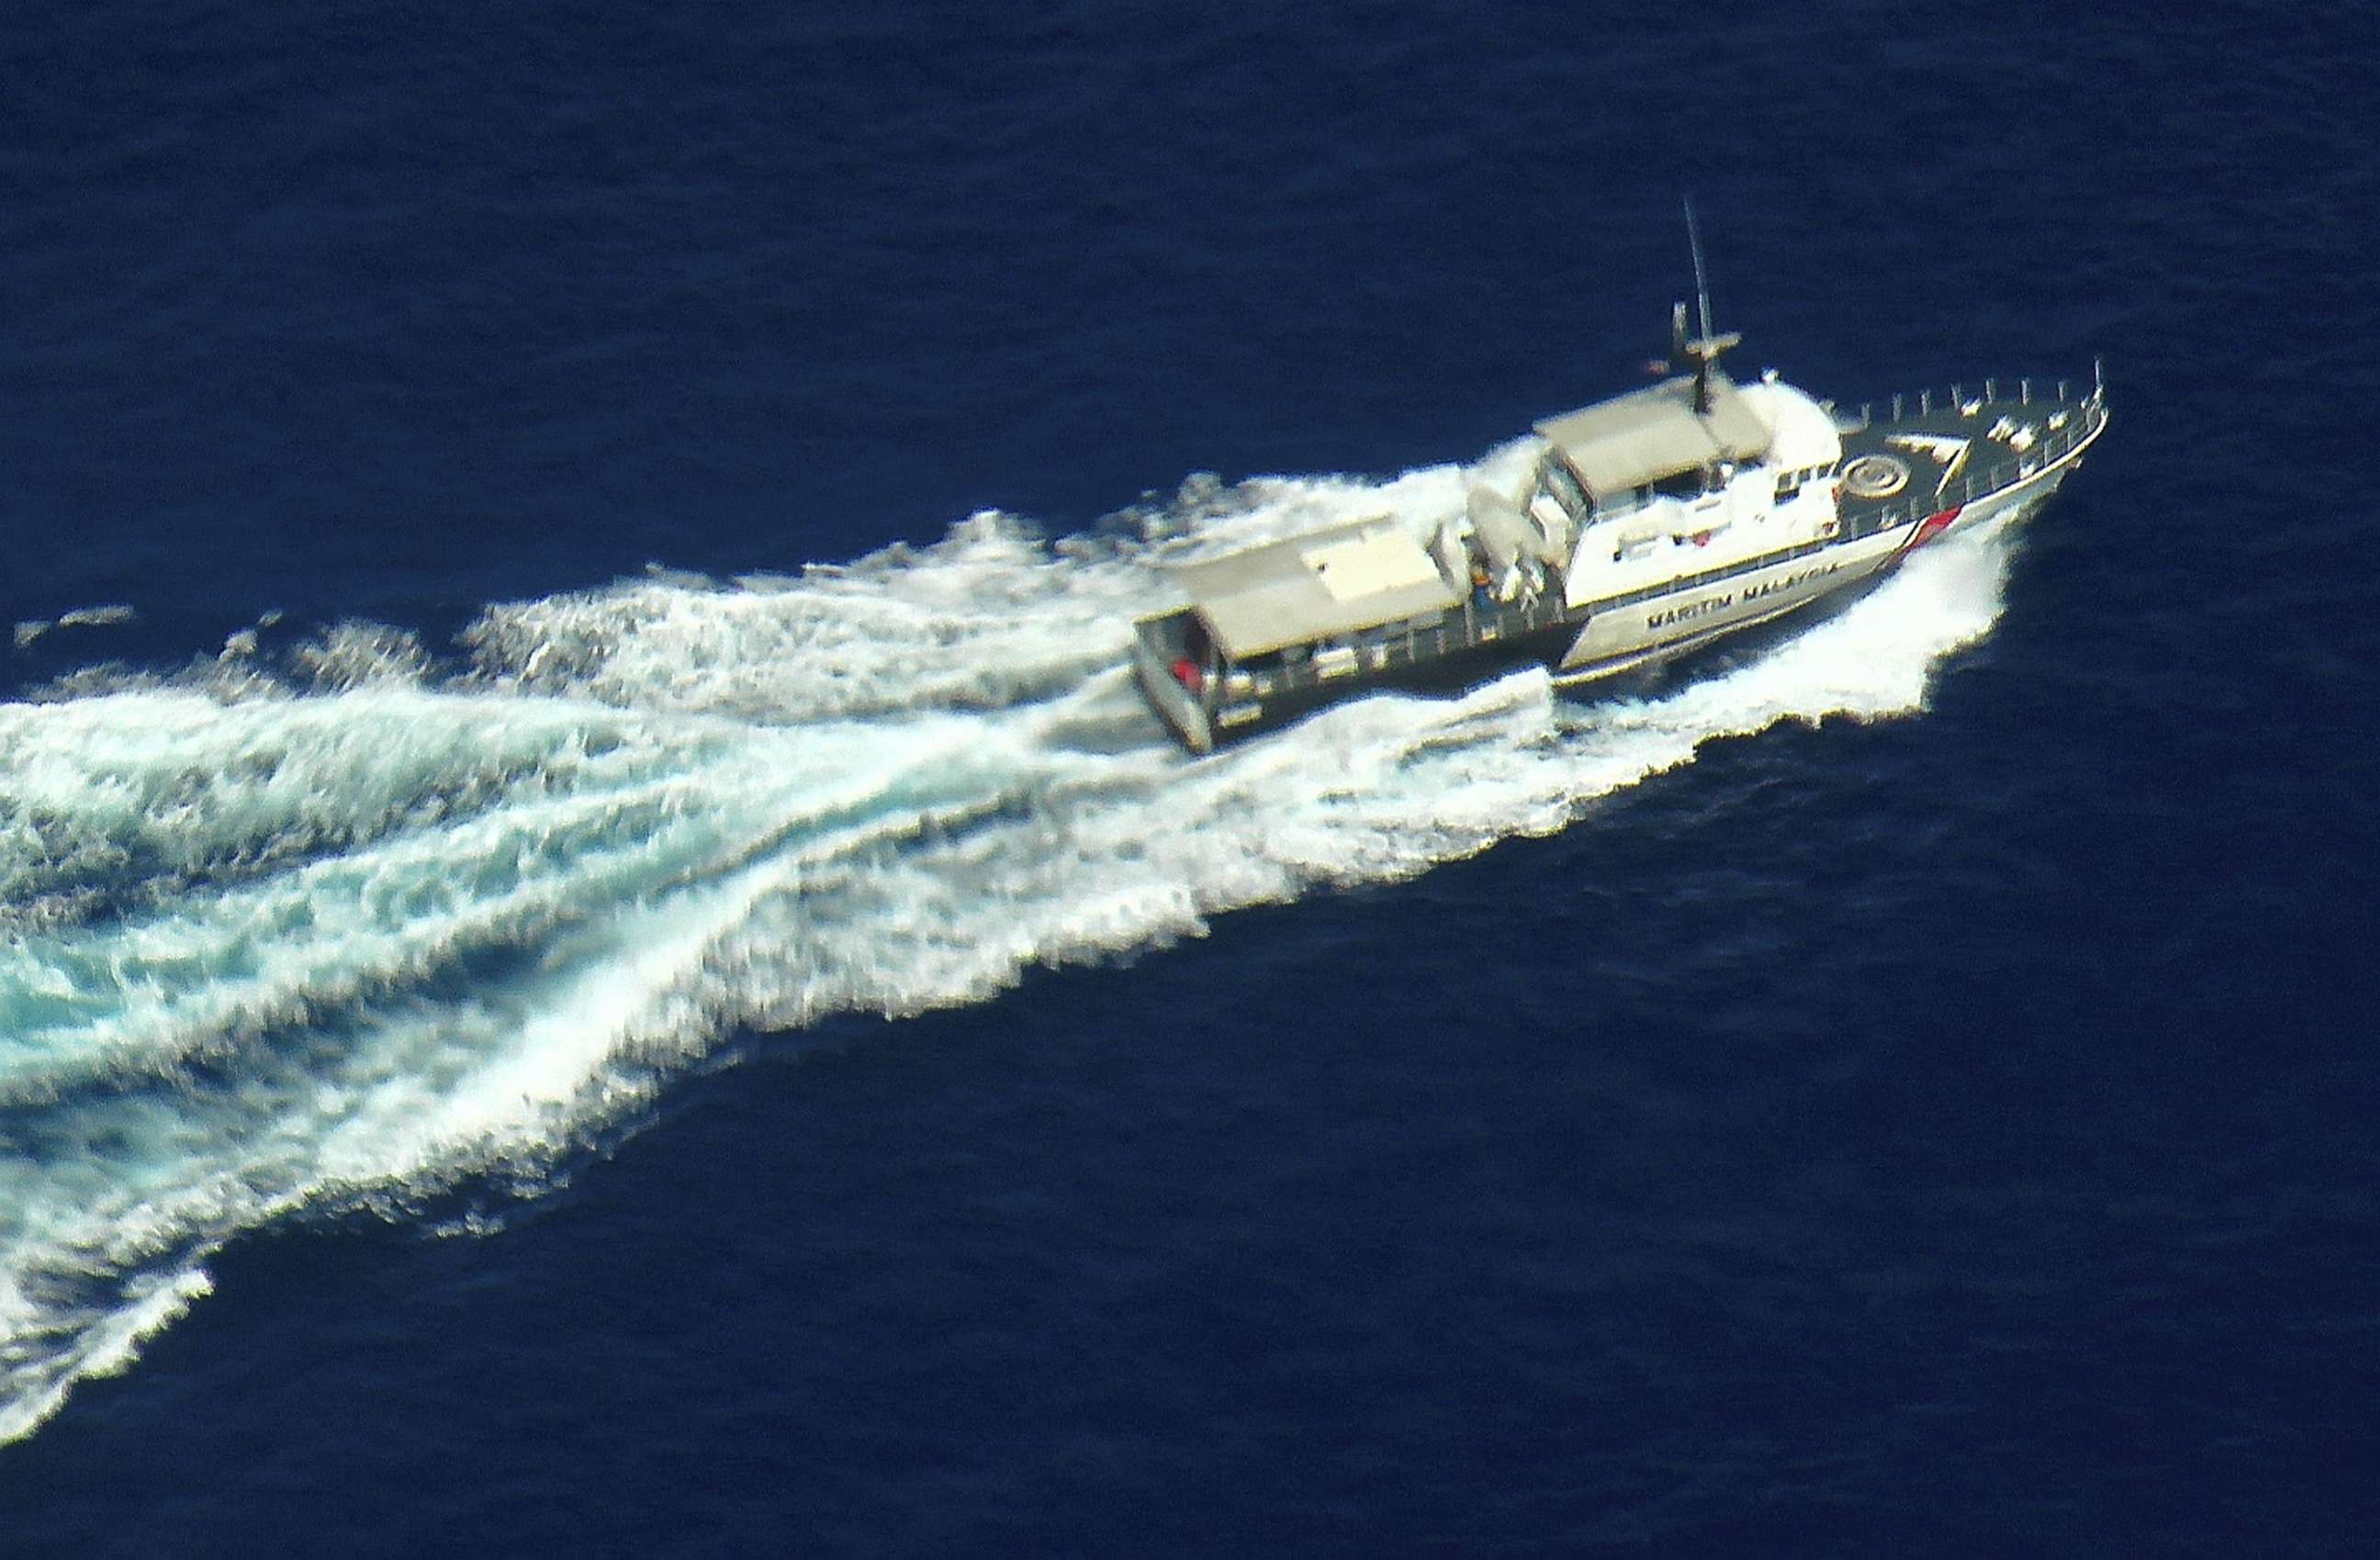 PHOTO: A patrol vessel of Malaysian Maritime Enforcement Agency participates in the search and rescue mission for Malaysia Airlines flight MH370 on March 9, 2014 off the Kelantan coast, Malaysia.